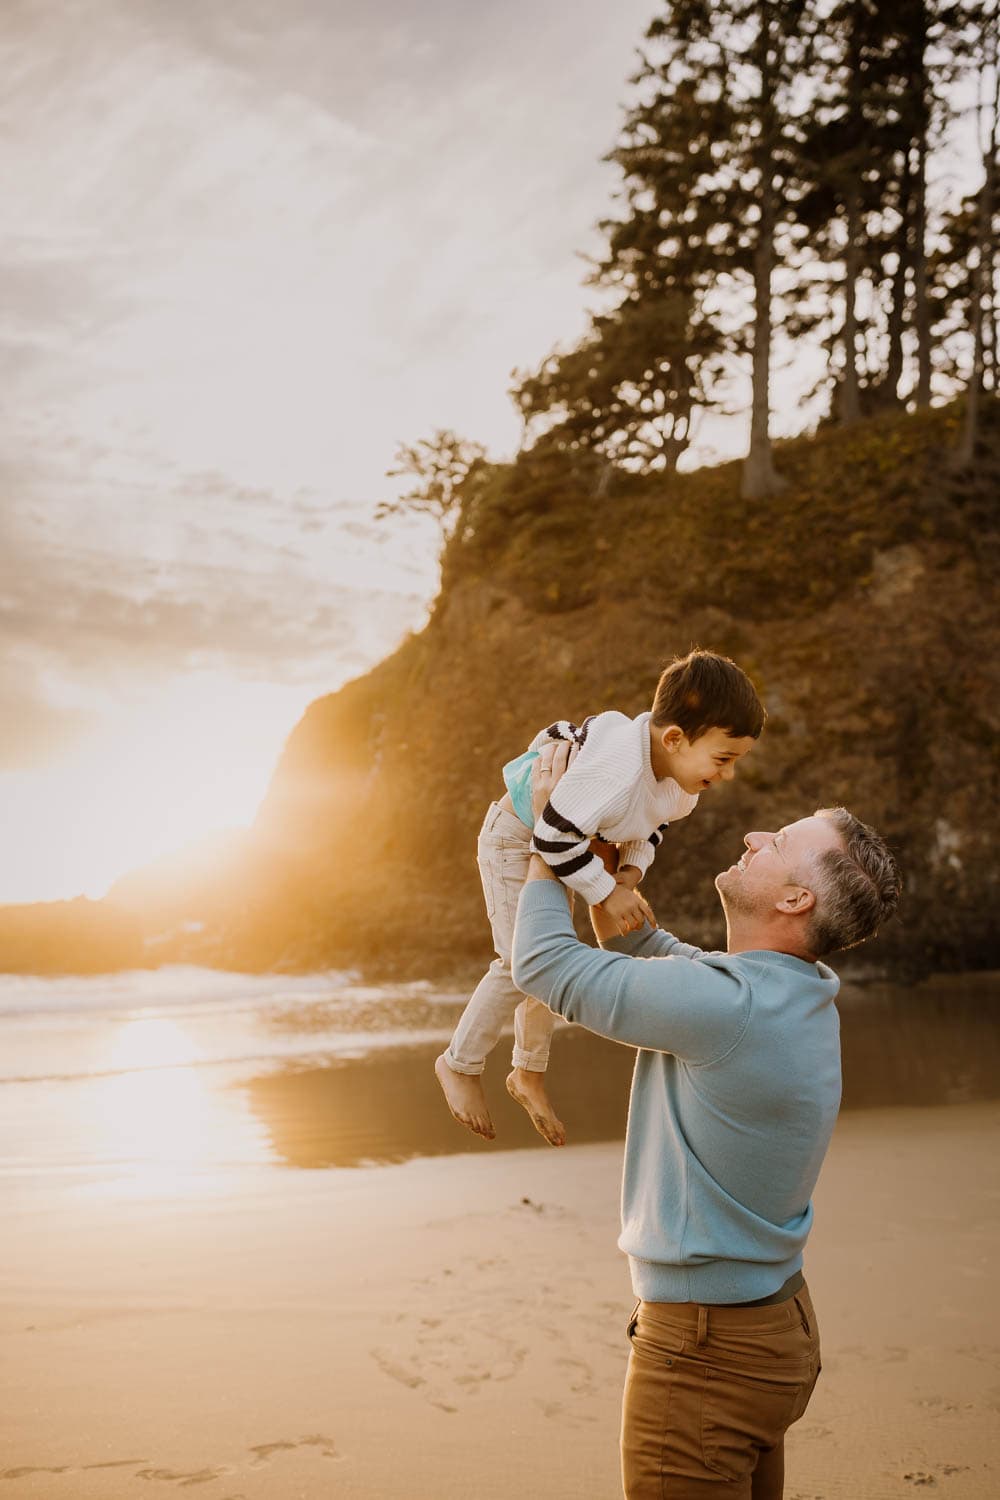 Dad lifting son in the air at the beach